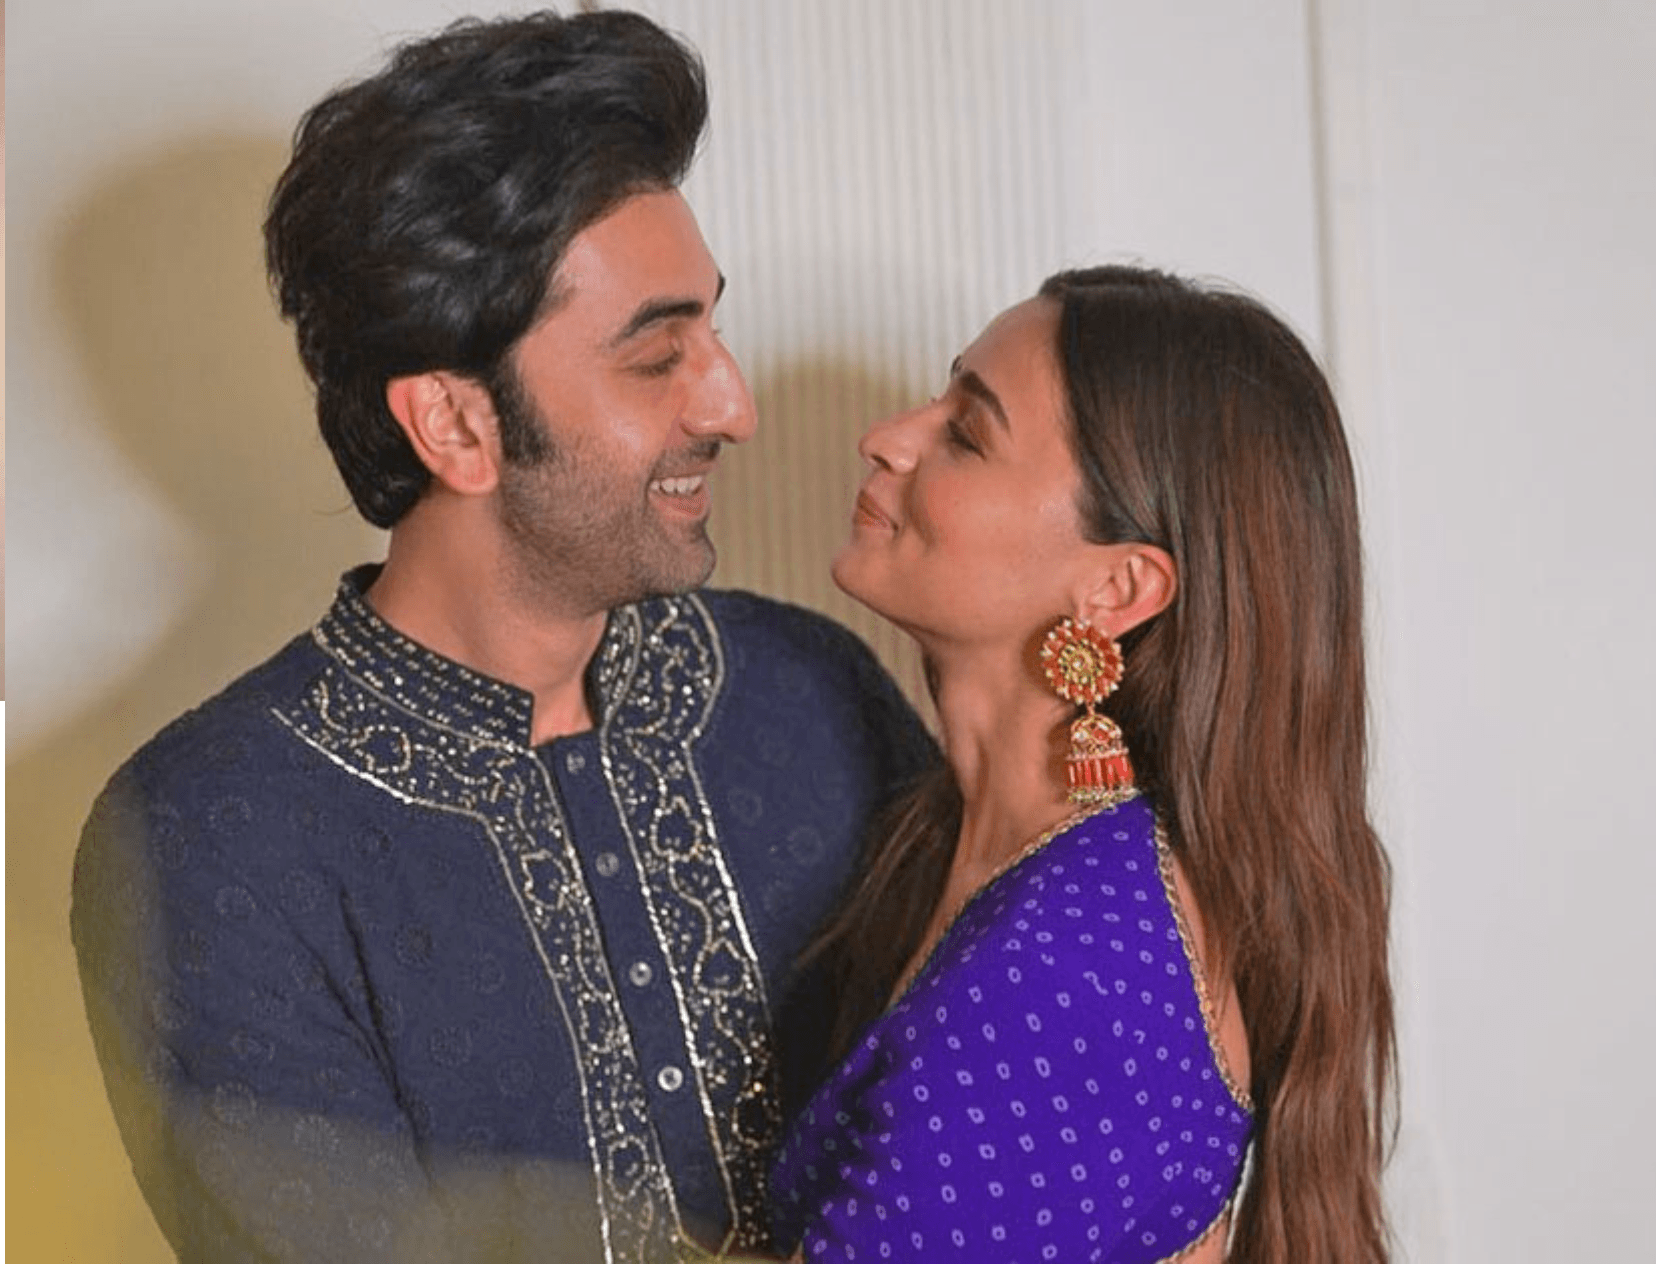 Fans Do Not Want Alia To Star Opposite Ranbir In Their Next, Here’s Why